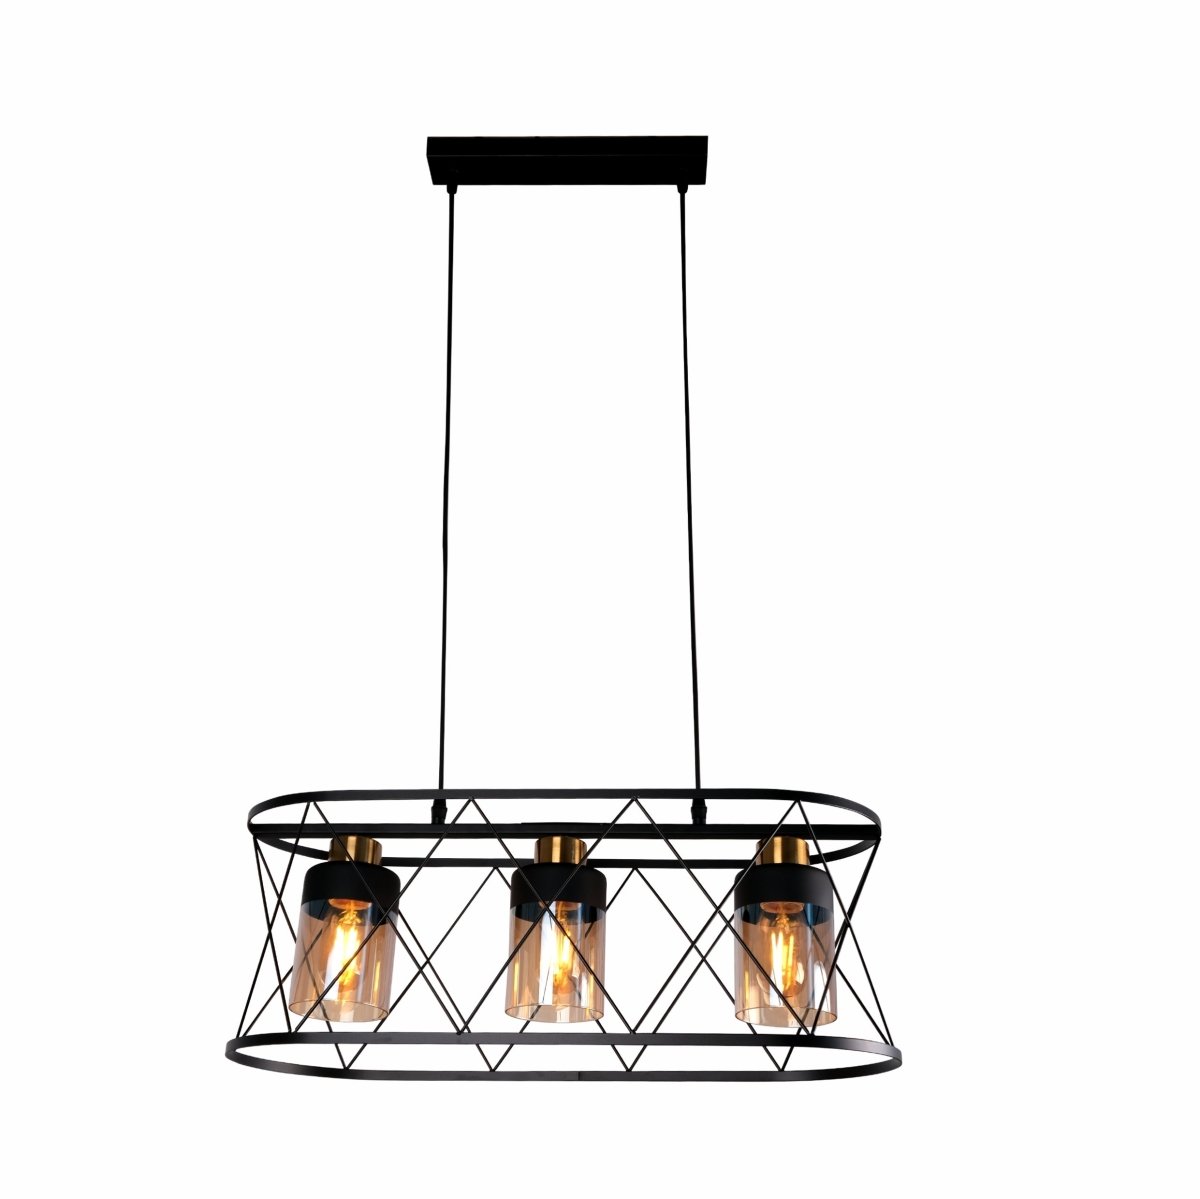 Main image of Black Cage Metal Amber Cylinder Glass Island Chandelier with 3xE27 Fittings | TEKLED 159-17498